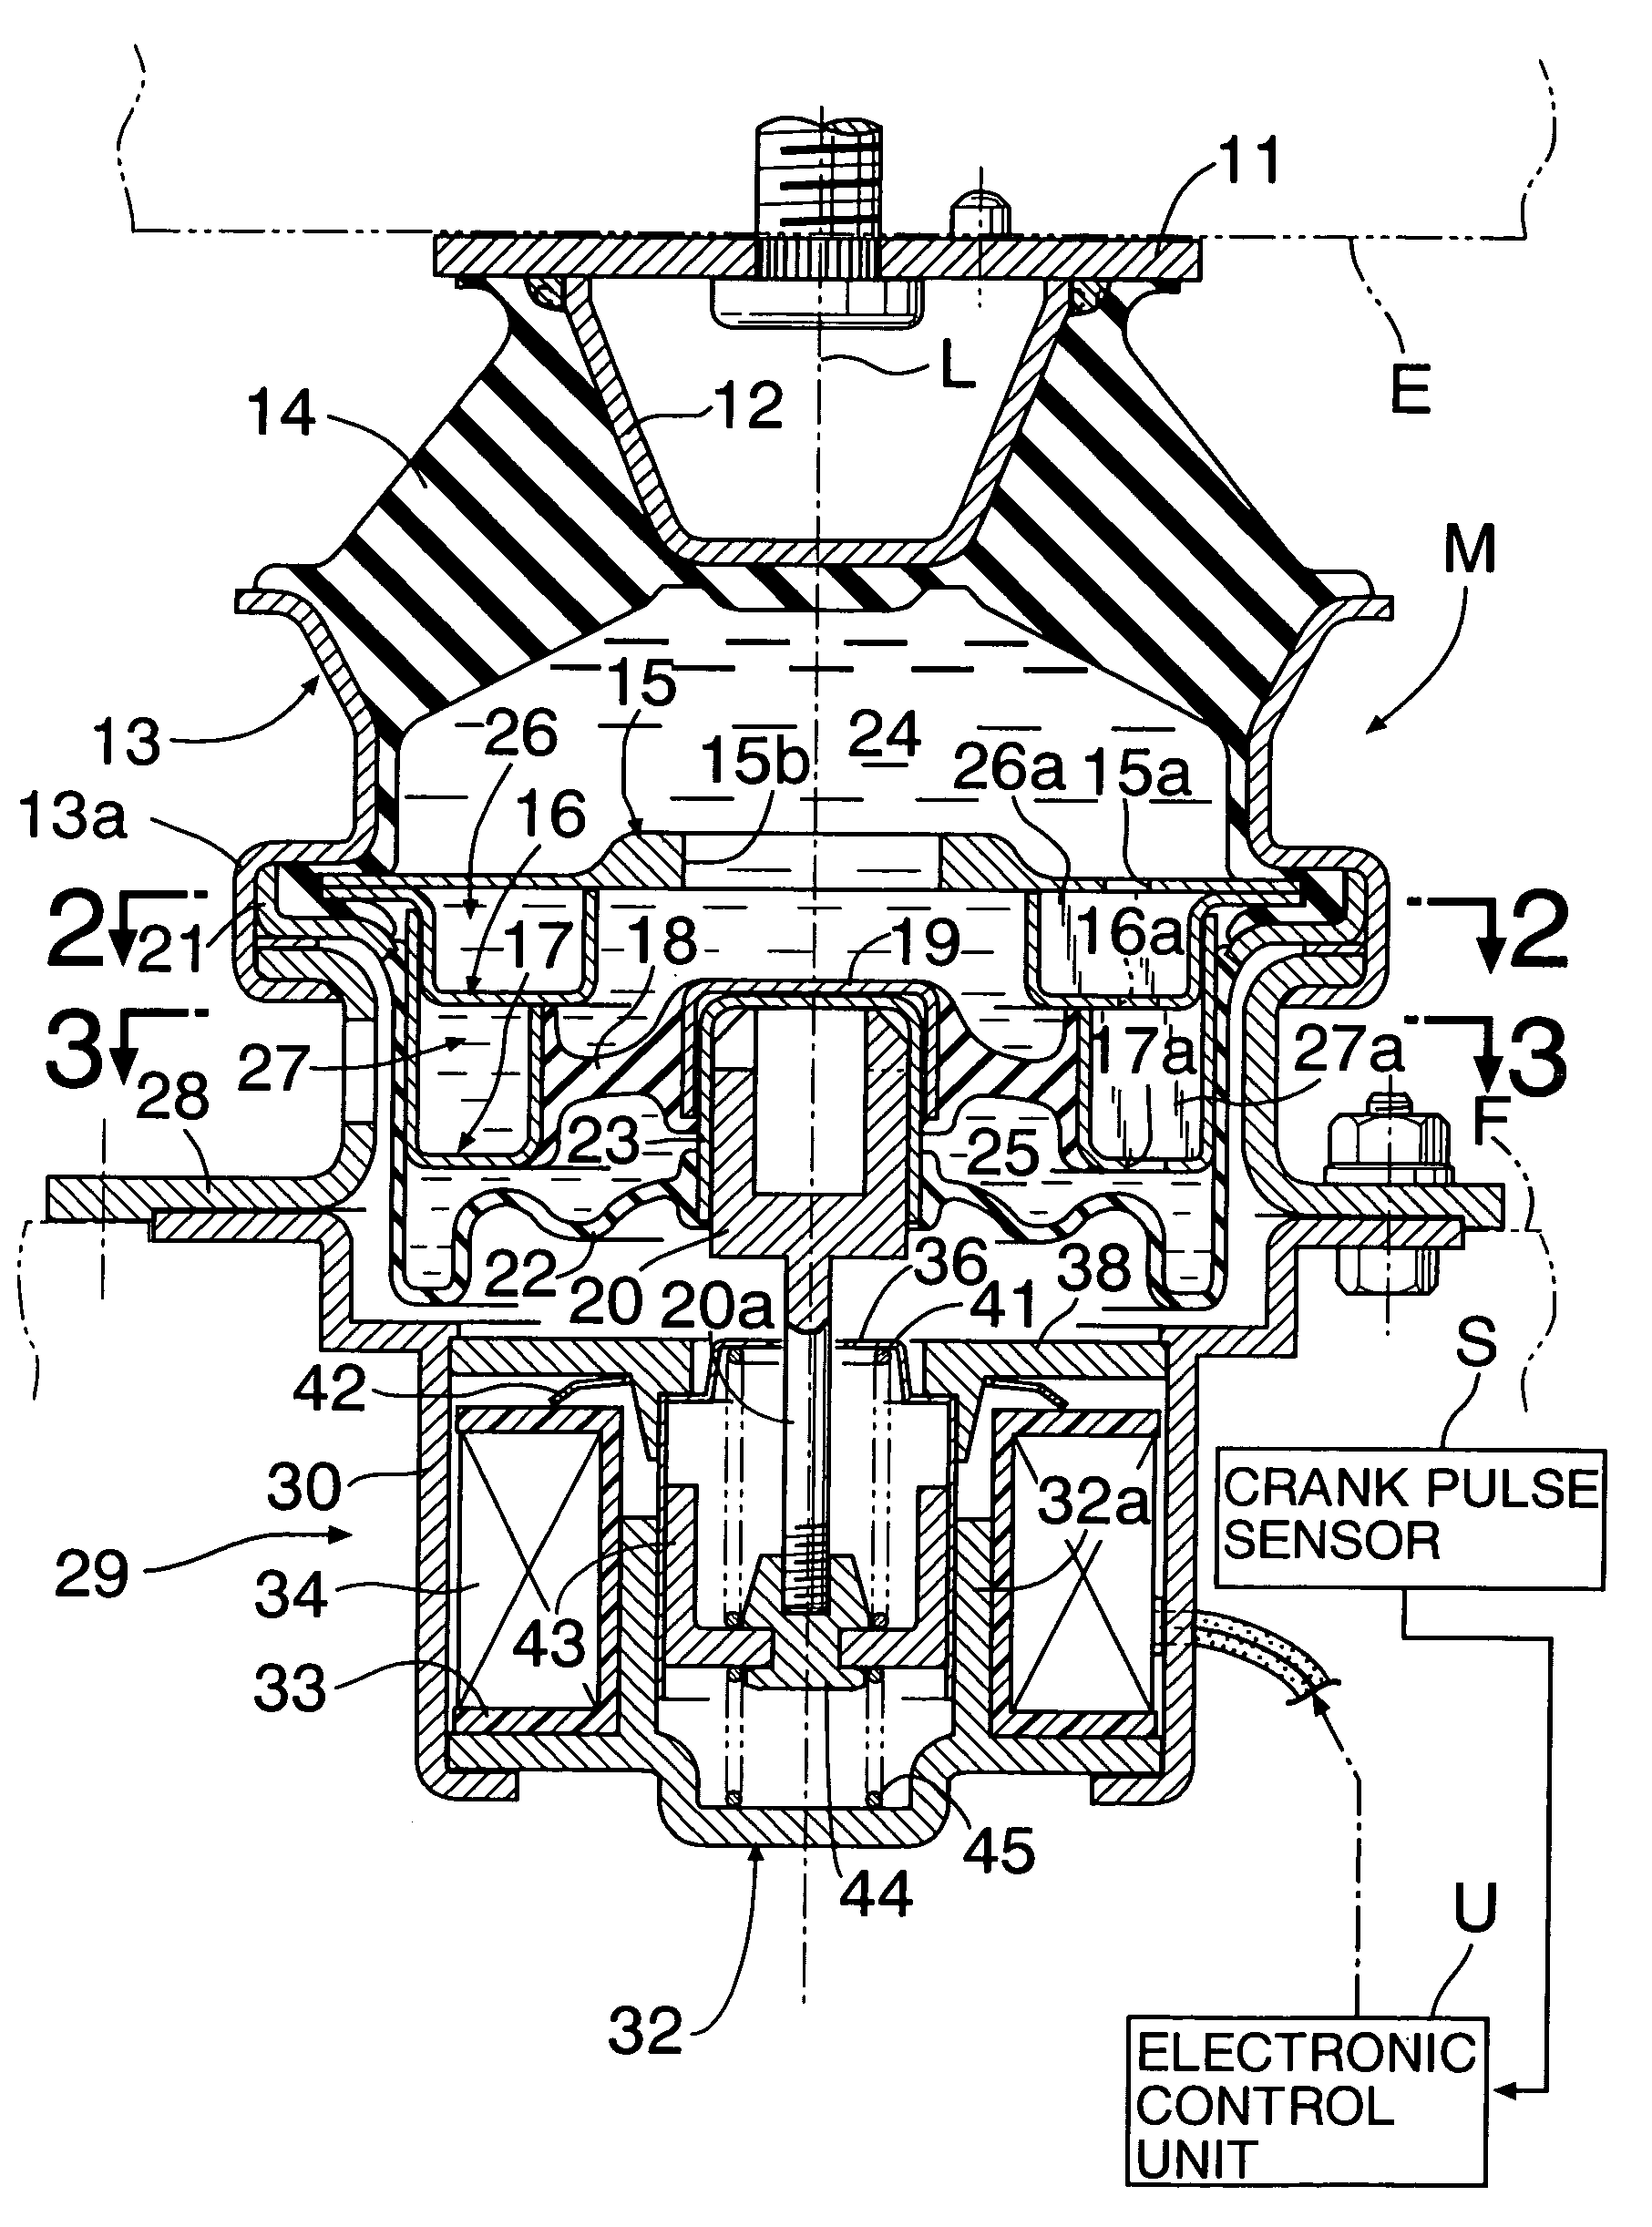 Anti-vibration support system for engine